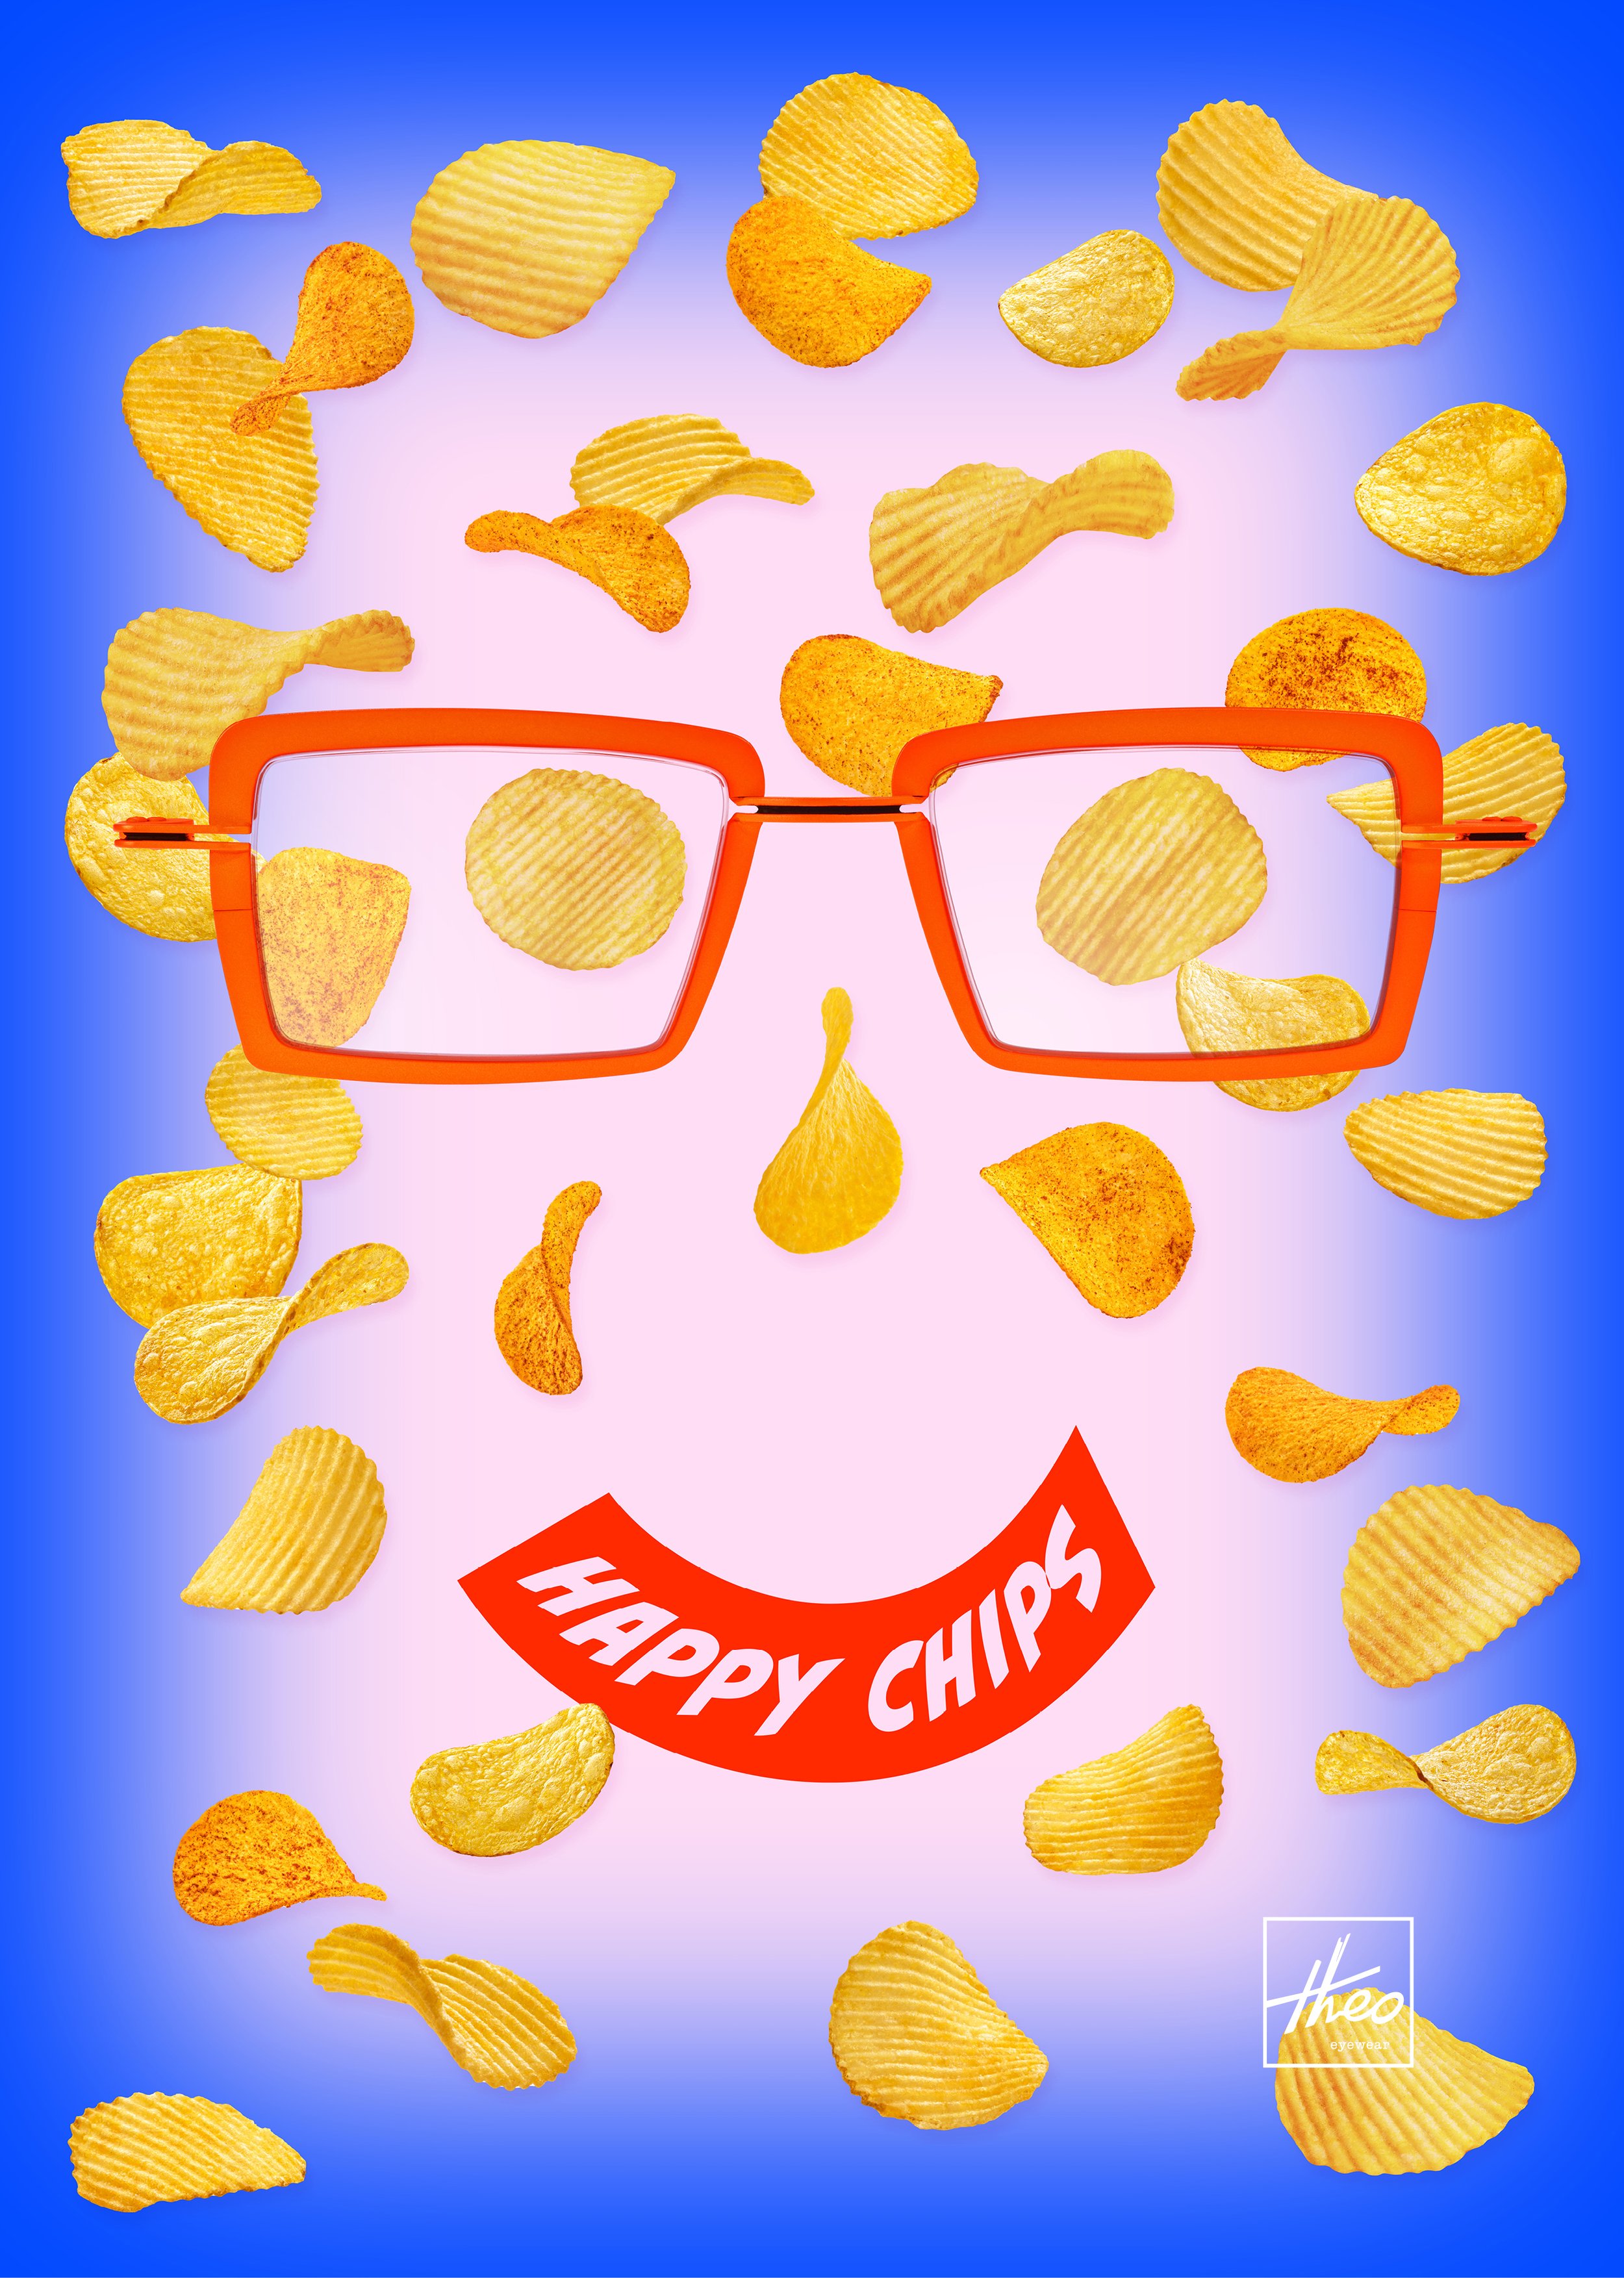 Happy chips_A4-01.jpg